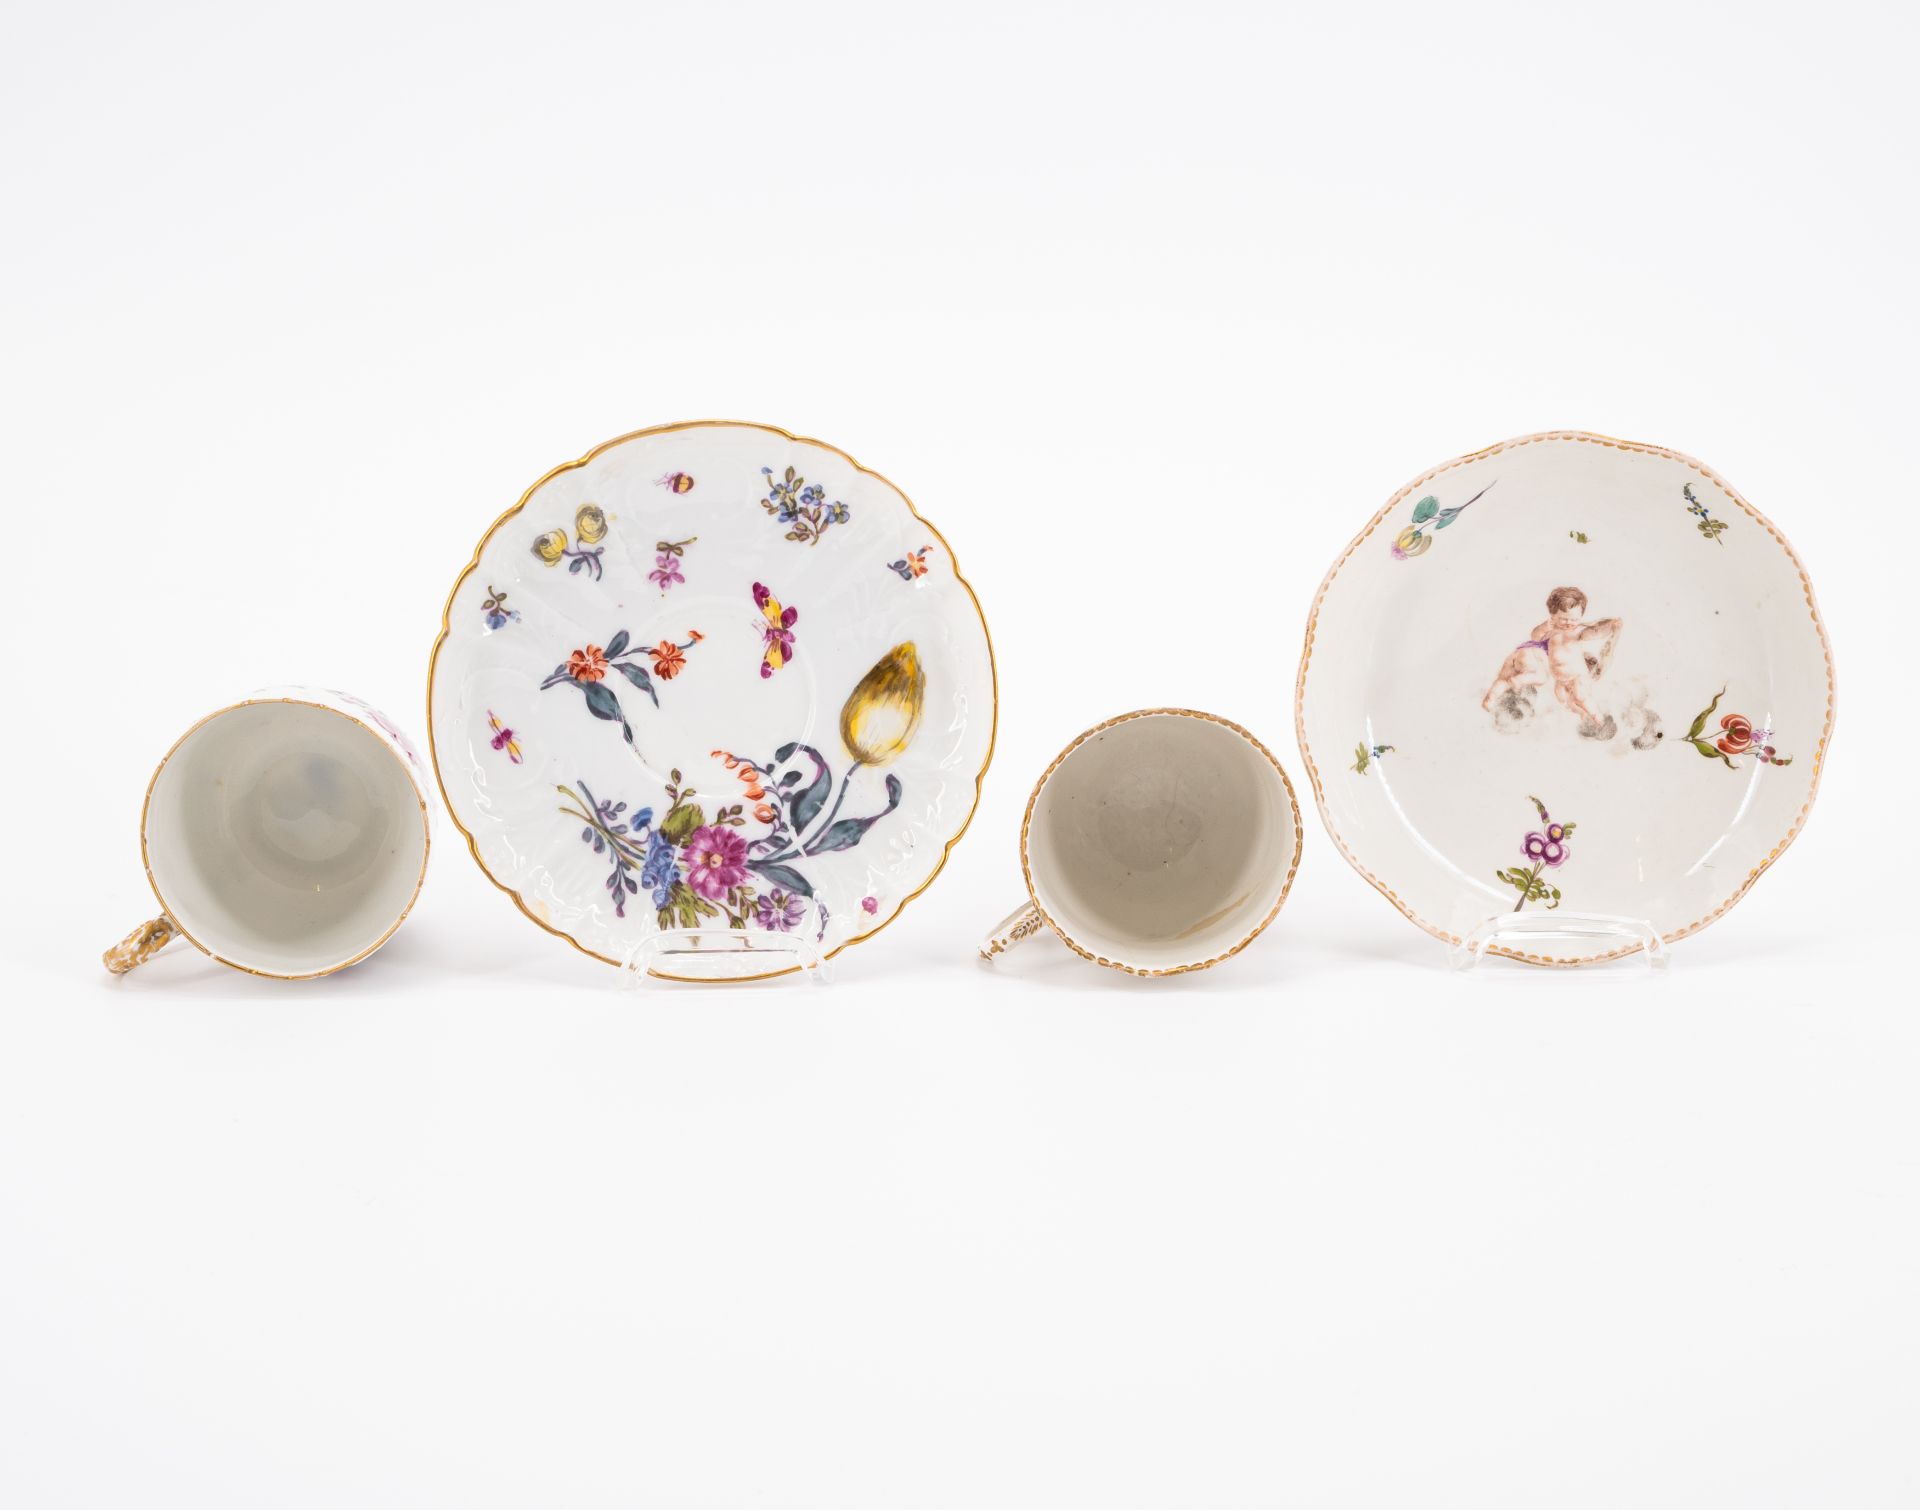 PORCELAIN SLOP BOWL, THREE CUPS AND SAUCERS WITH FIGURATIVE AND FLORAL DECOR - Image 5 of 22